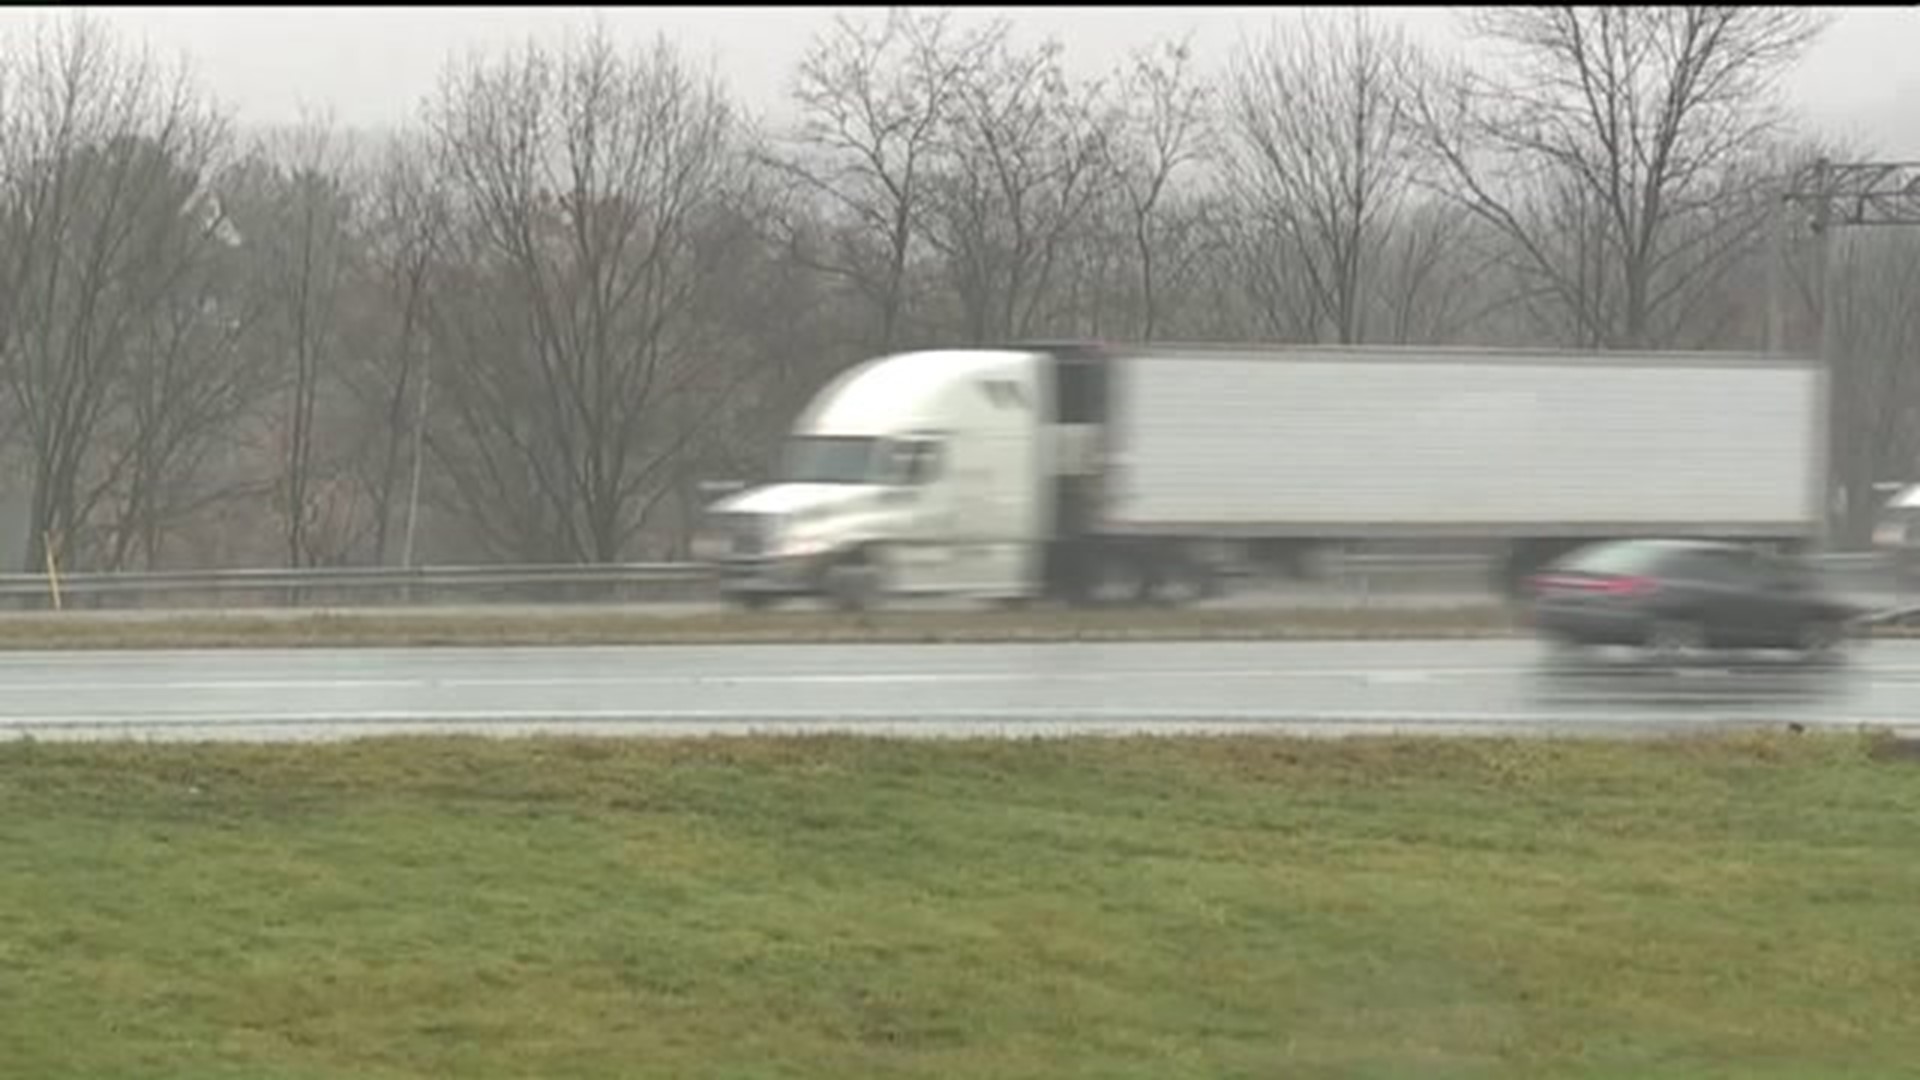 PennDOT Plans to Install Guide Rails to Prevent Crashes